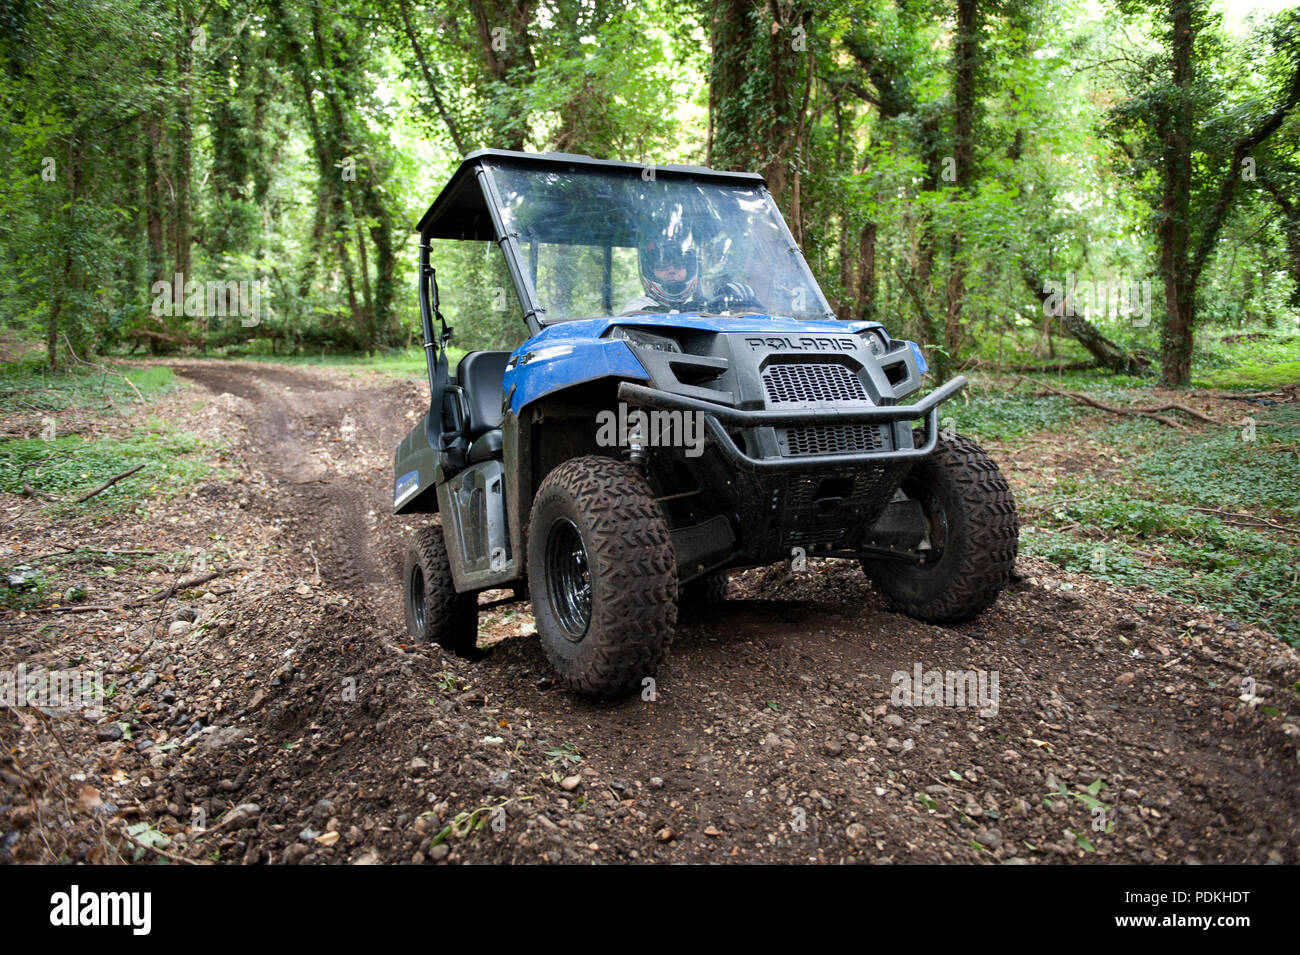 A Polaris Ranger all terrain vehicle demonstration at the annual conference and outdoor exhibition for groundsmen at the Royal Windsor Racecourse,  UK Stock Photo